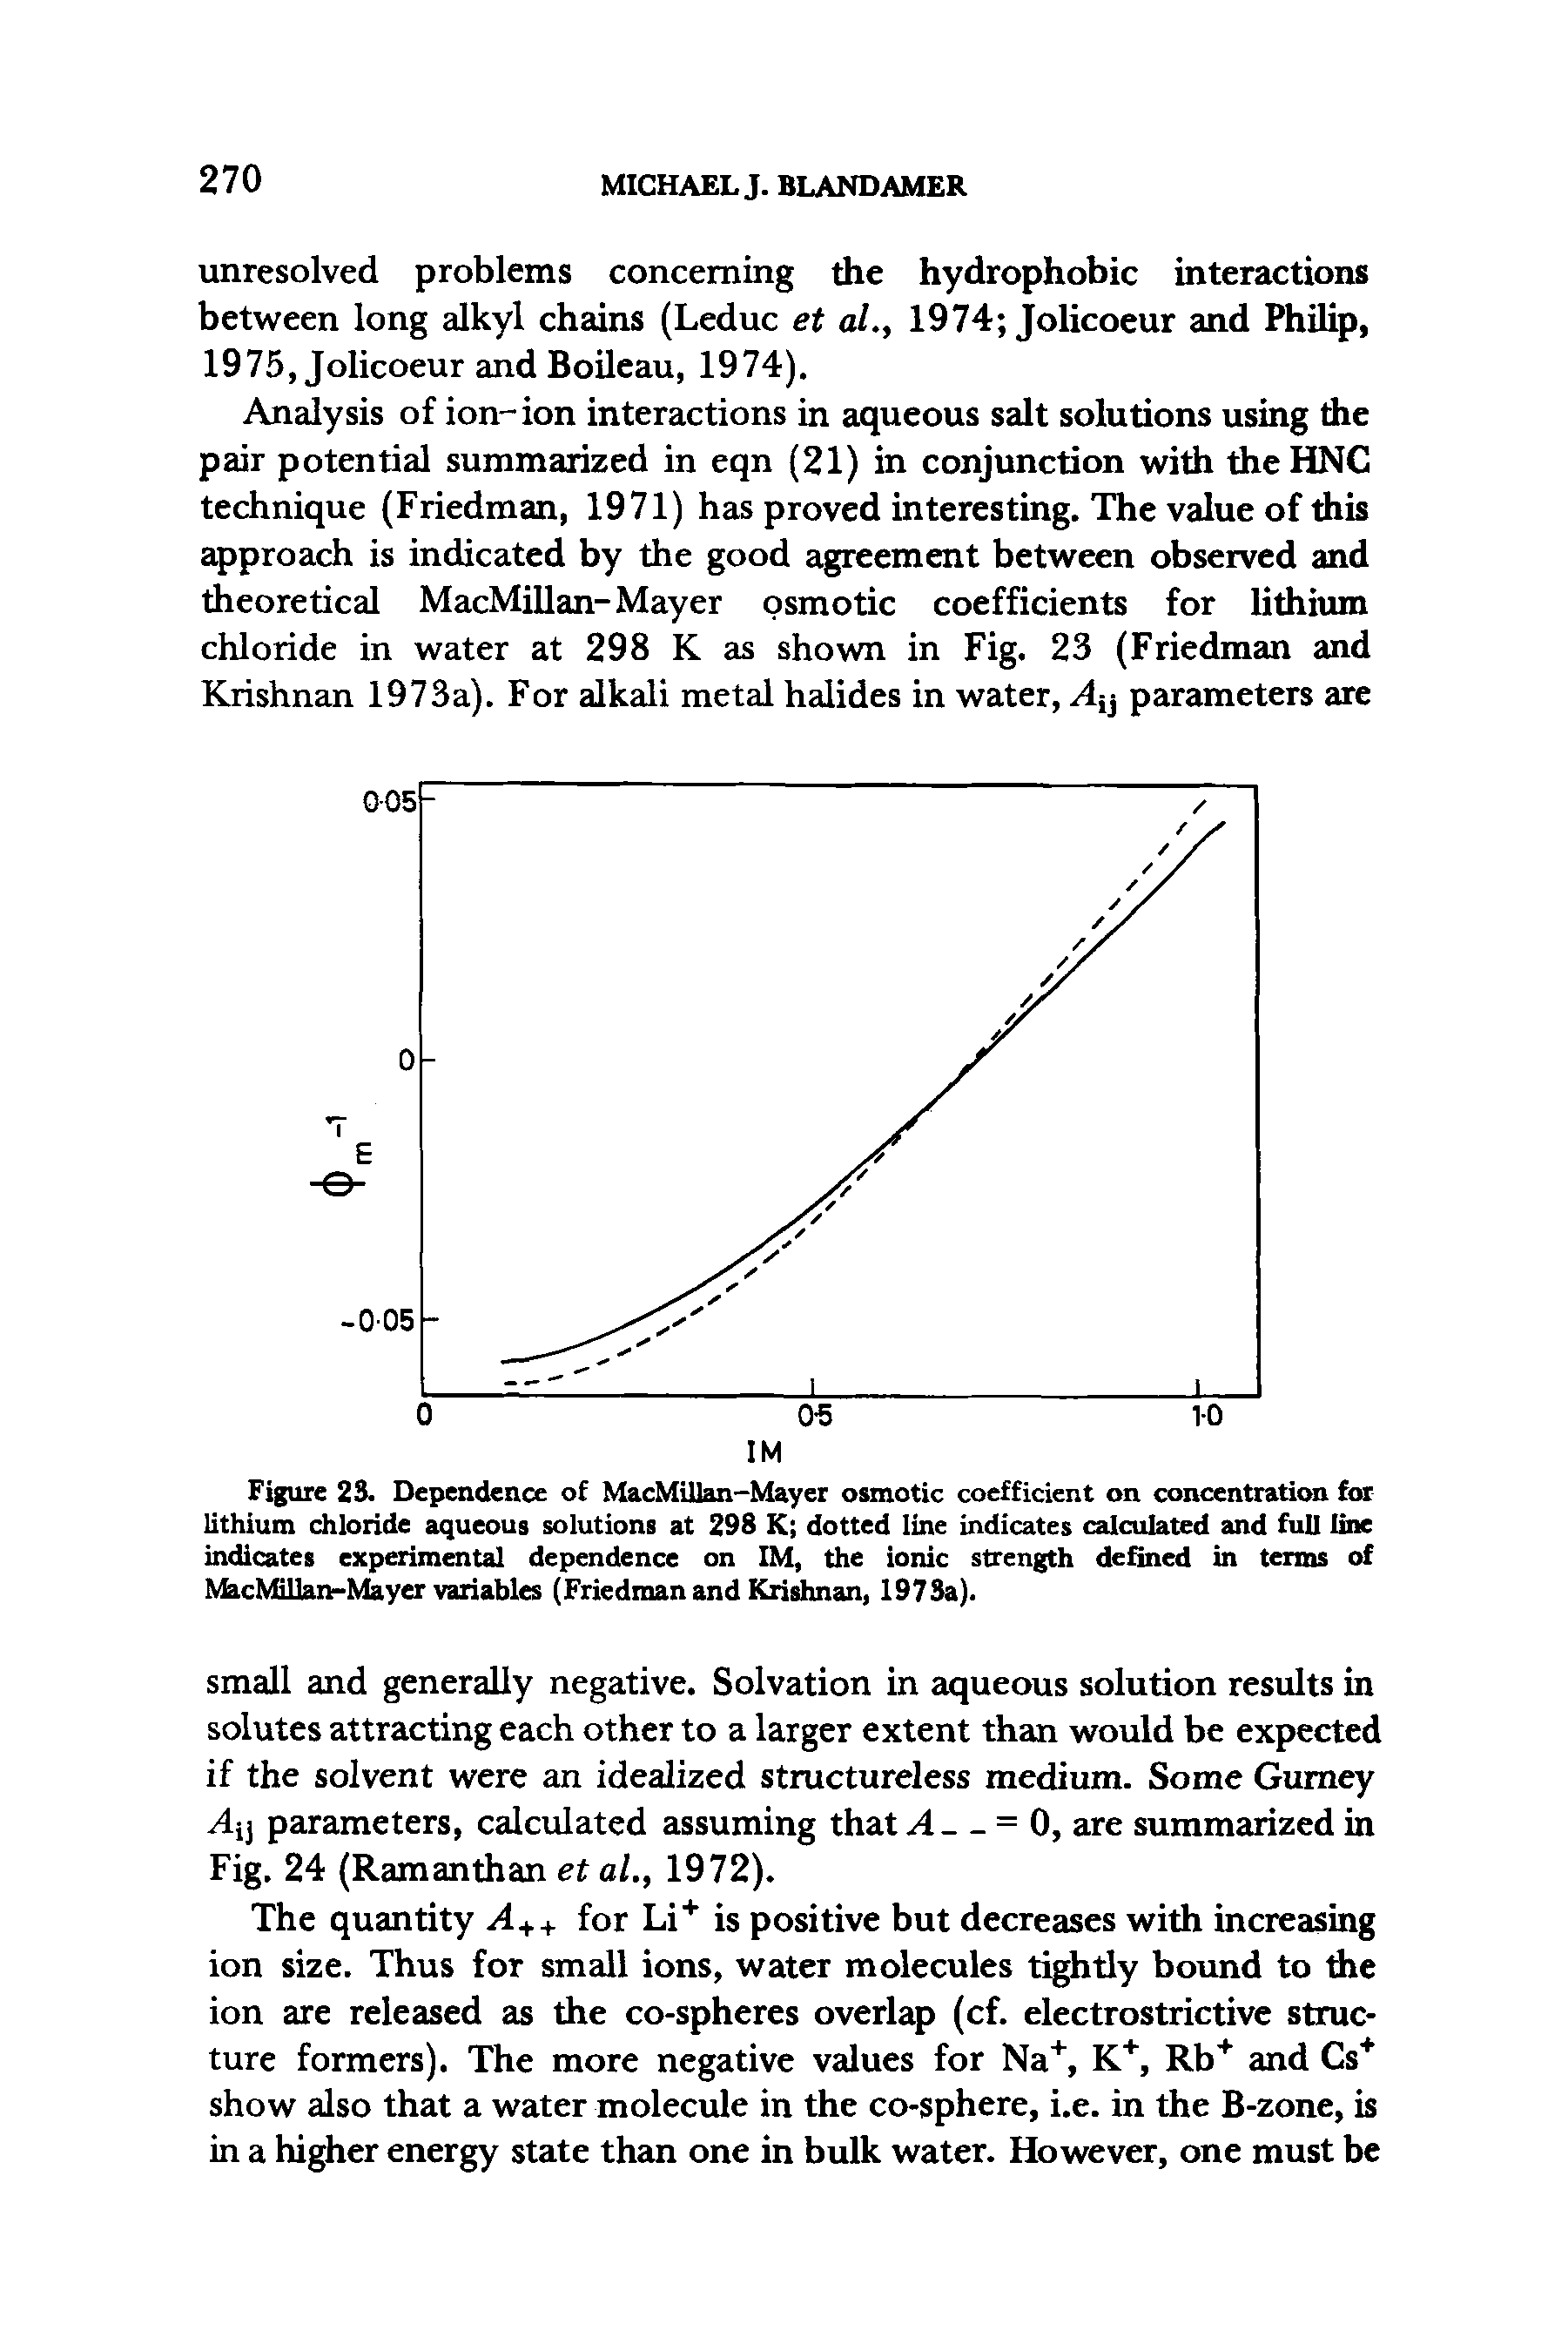 Figure 23. Dependence of MacMillan-Mayer osmotic coefficient on concentration for lithium chloride aqueous solutions at 298 K dotted line indicates calculated and full line indicates experimental dependence on IM, the ionic strength defined in terms of MacMillan-Mayer variables (Friedman and Krishnan, 1973a).